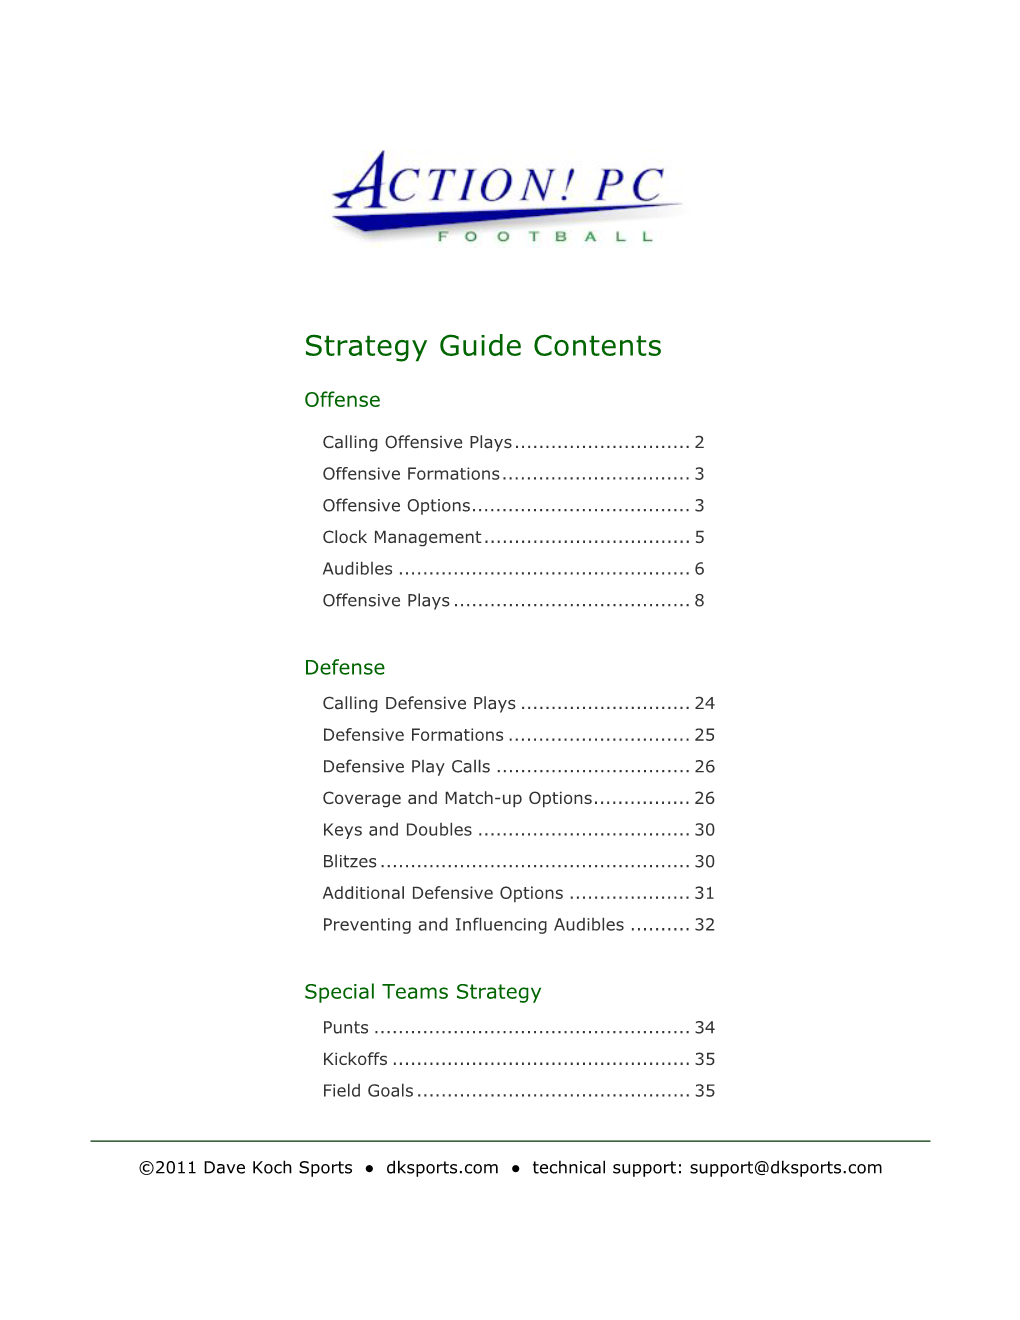 Action! PC Football Strategy Guide